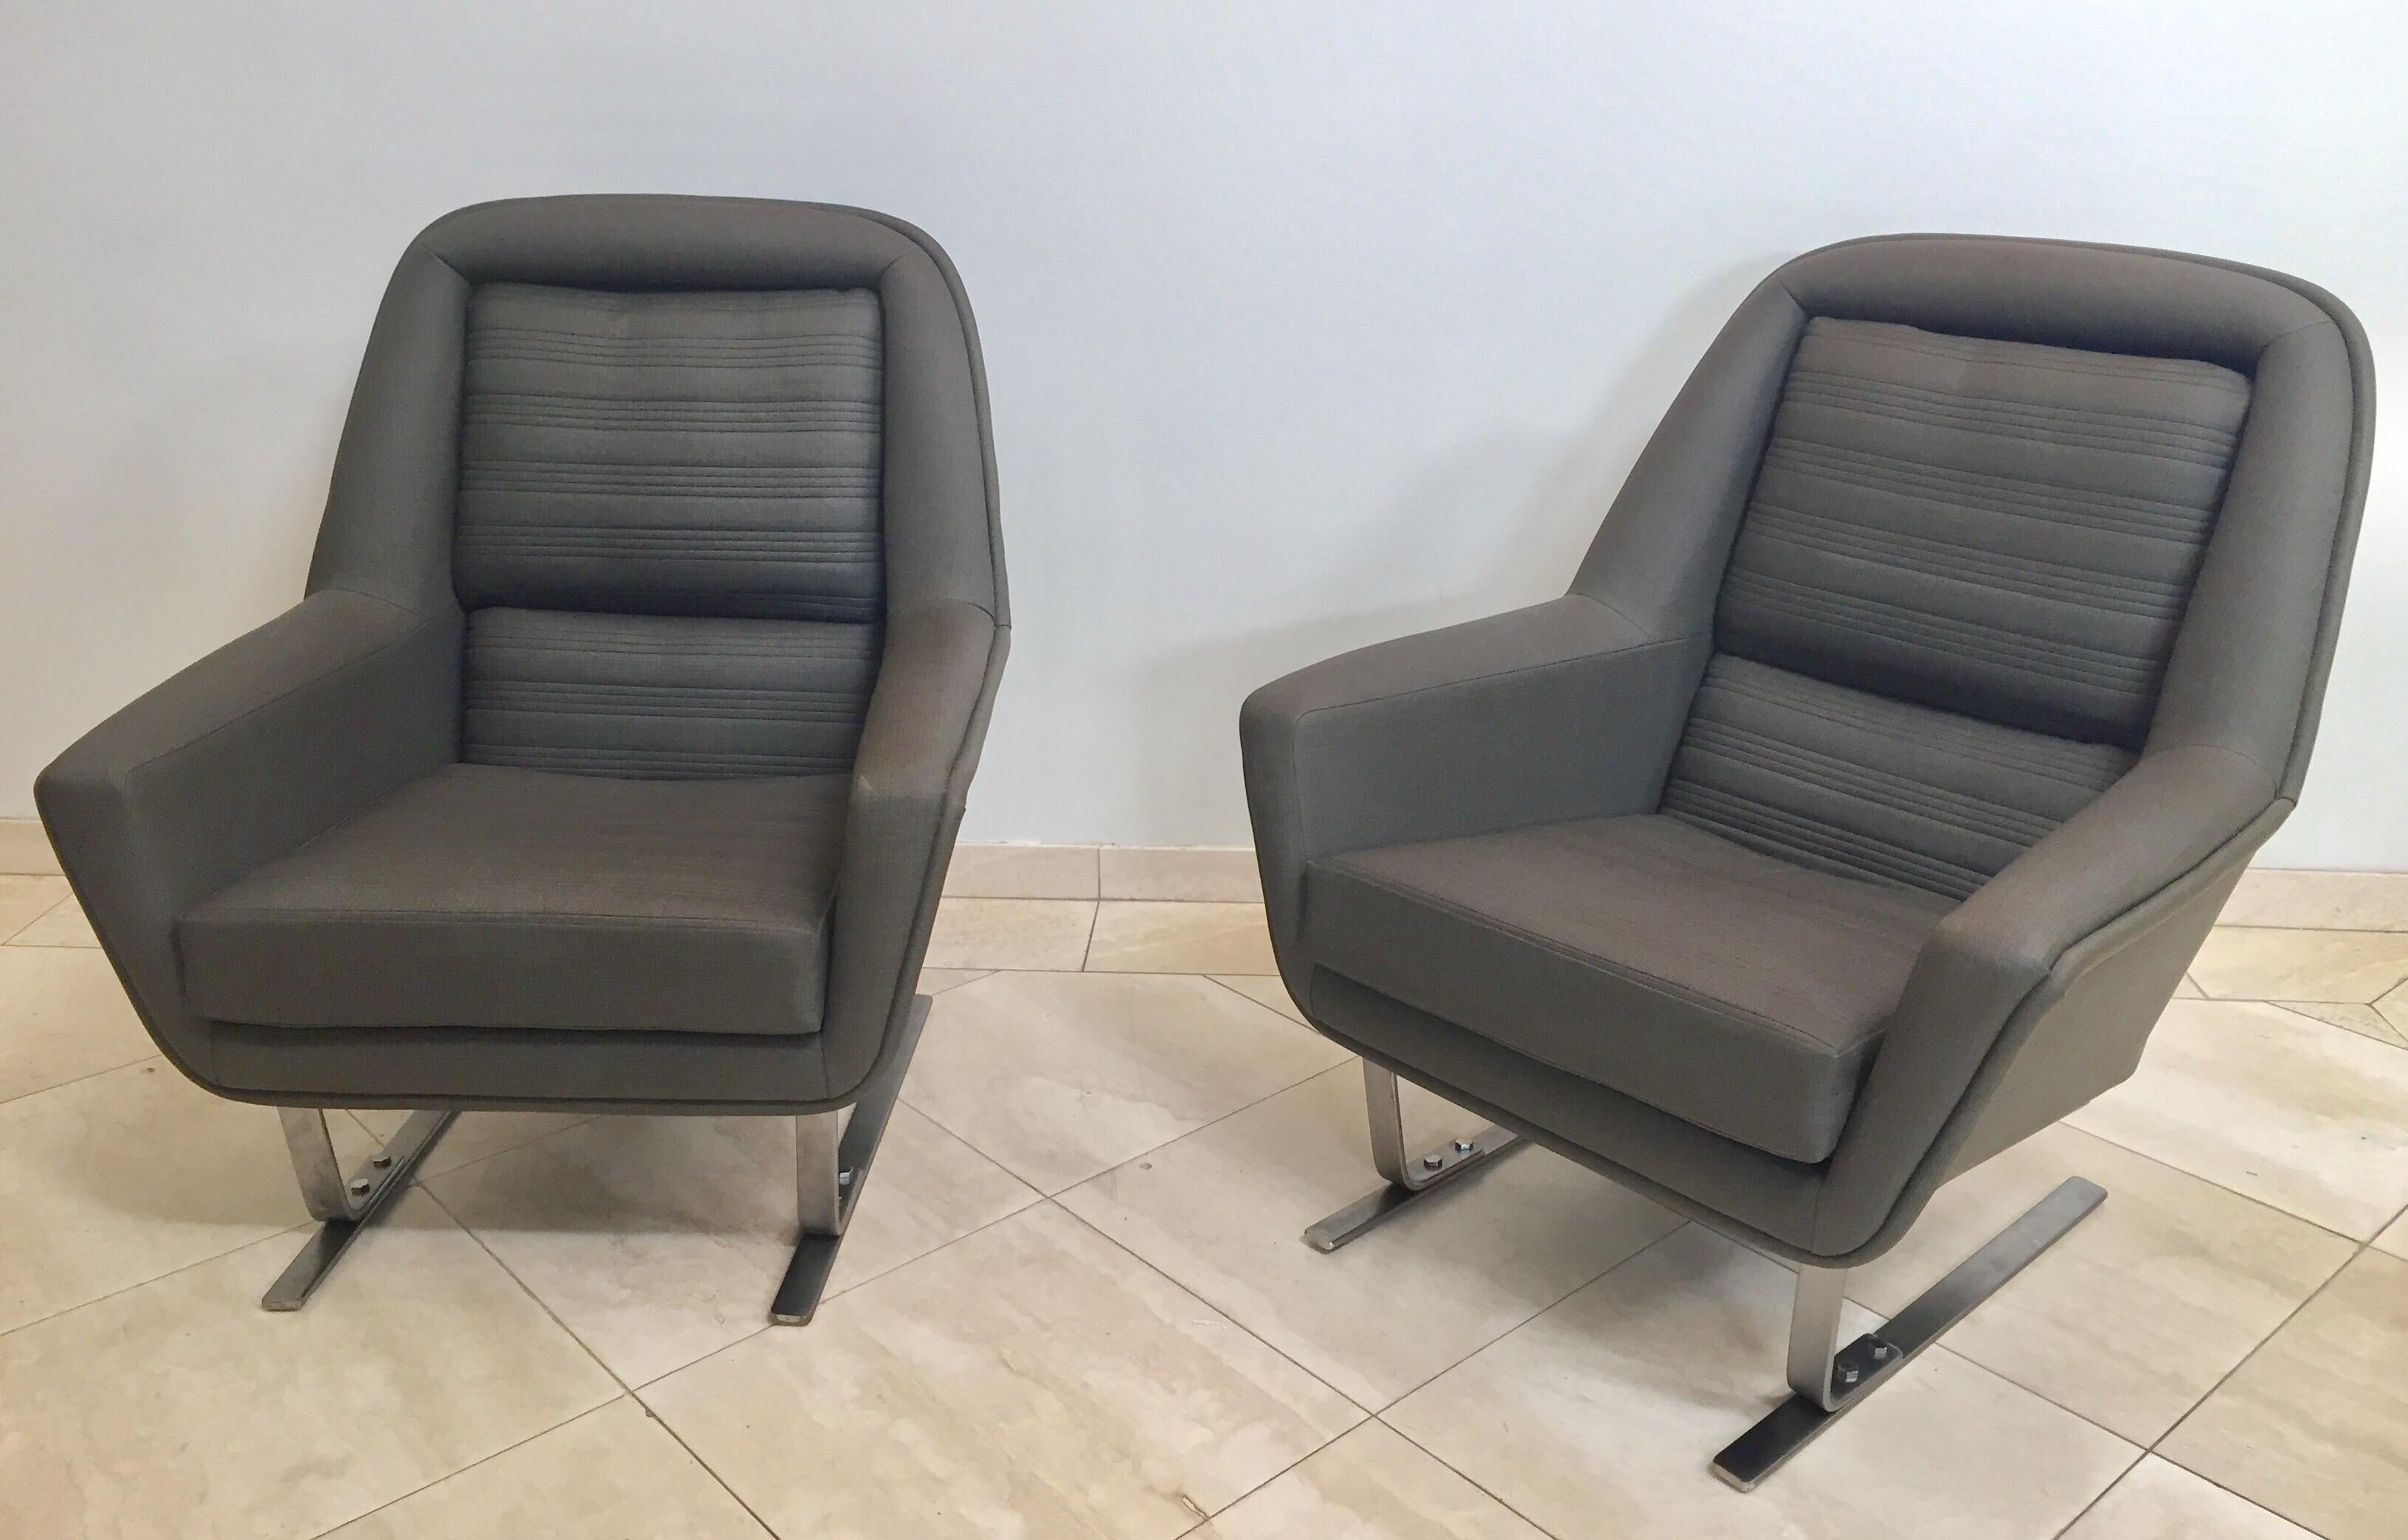 Rare and stunning pair of club lounge chairs, Augusto Bozzi, Saporiti style.
These cantilever armchairs are typical for the German and Eastern Europe Bauhaus era.
These armchairs would make an eye-catching addition to any interior such as living